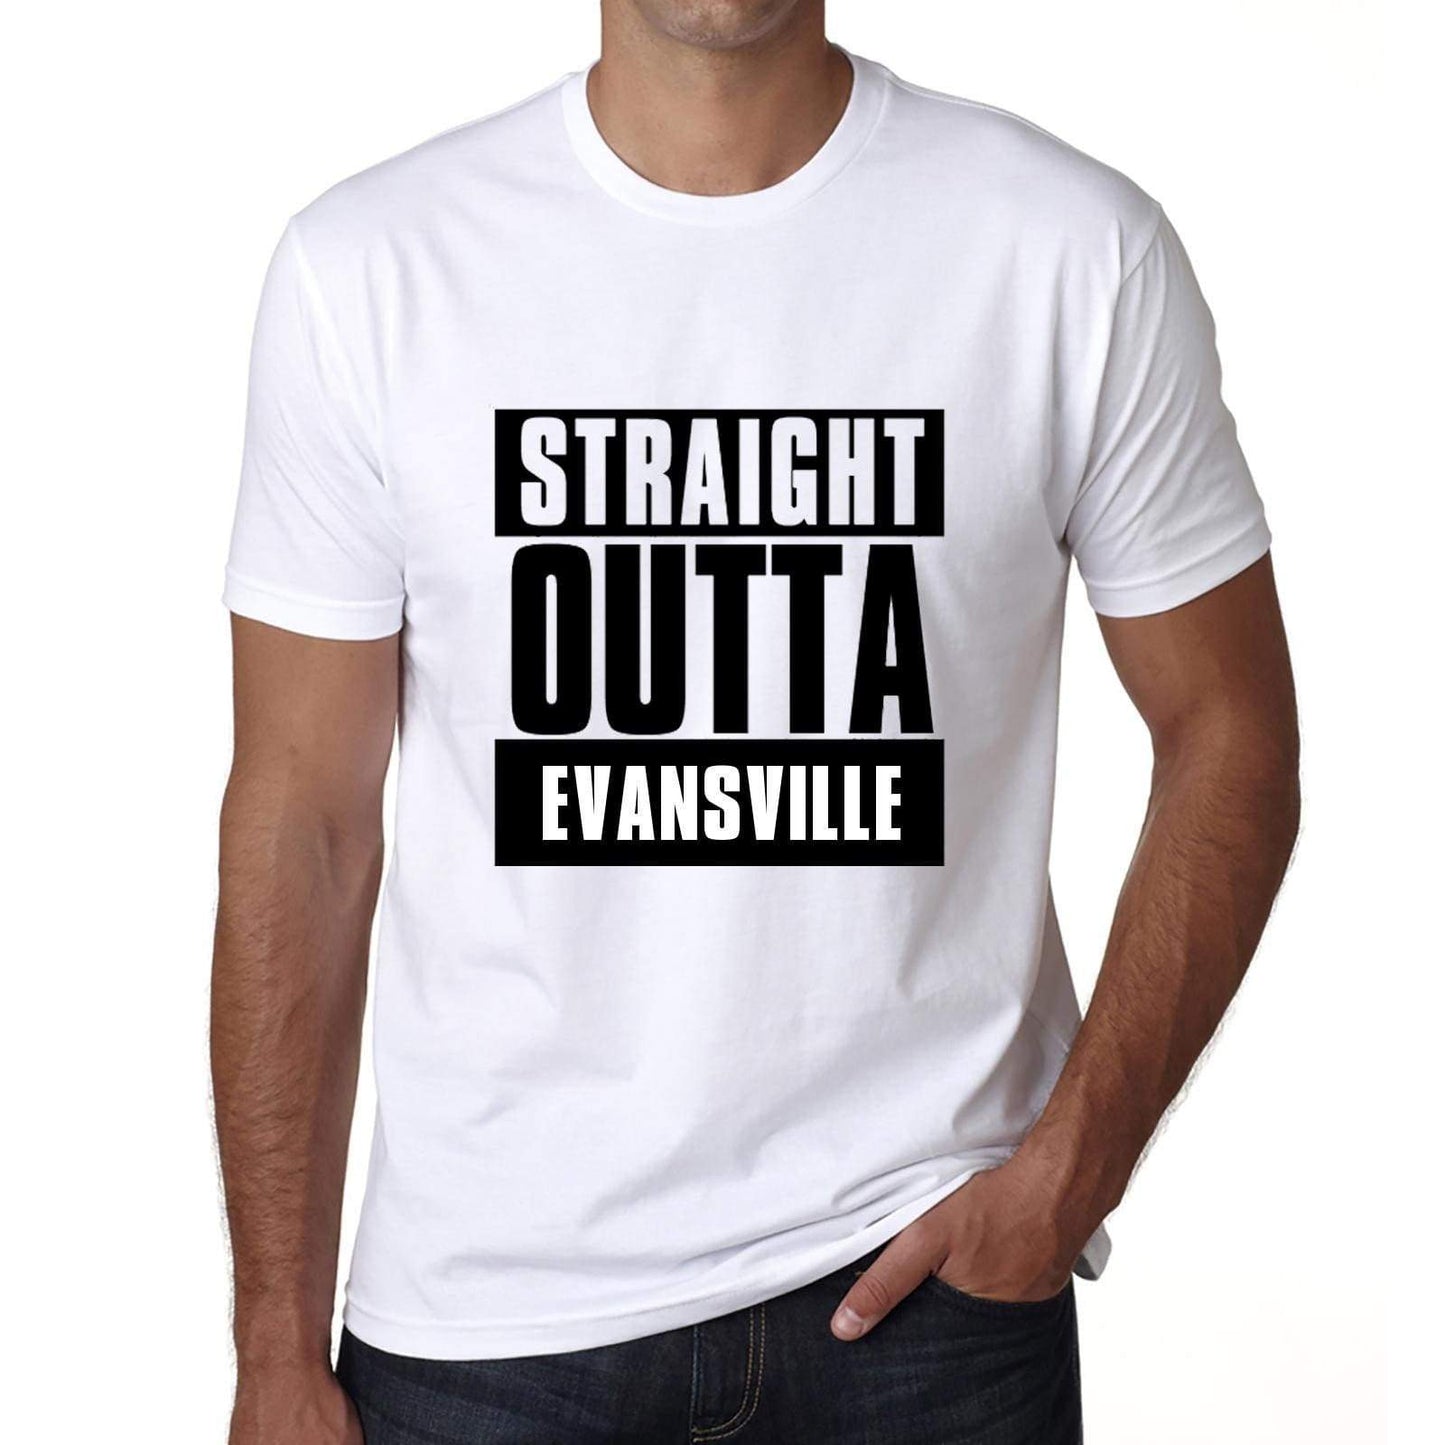 Straight Outta Evansville Mens Short Sleeve Round Neck T-Shirt 00027 - White / S - Casual